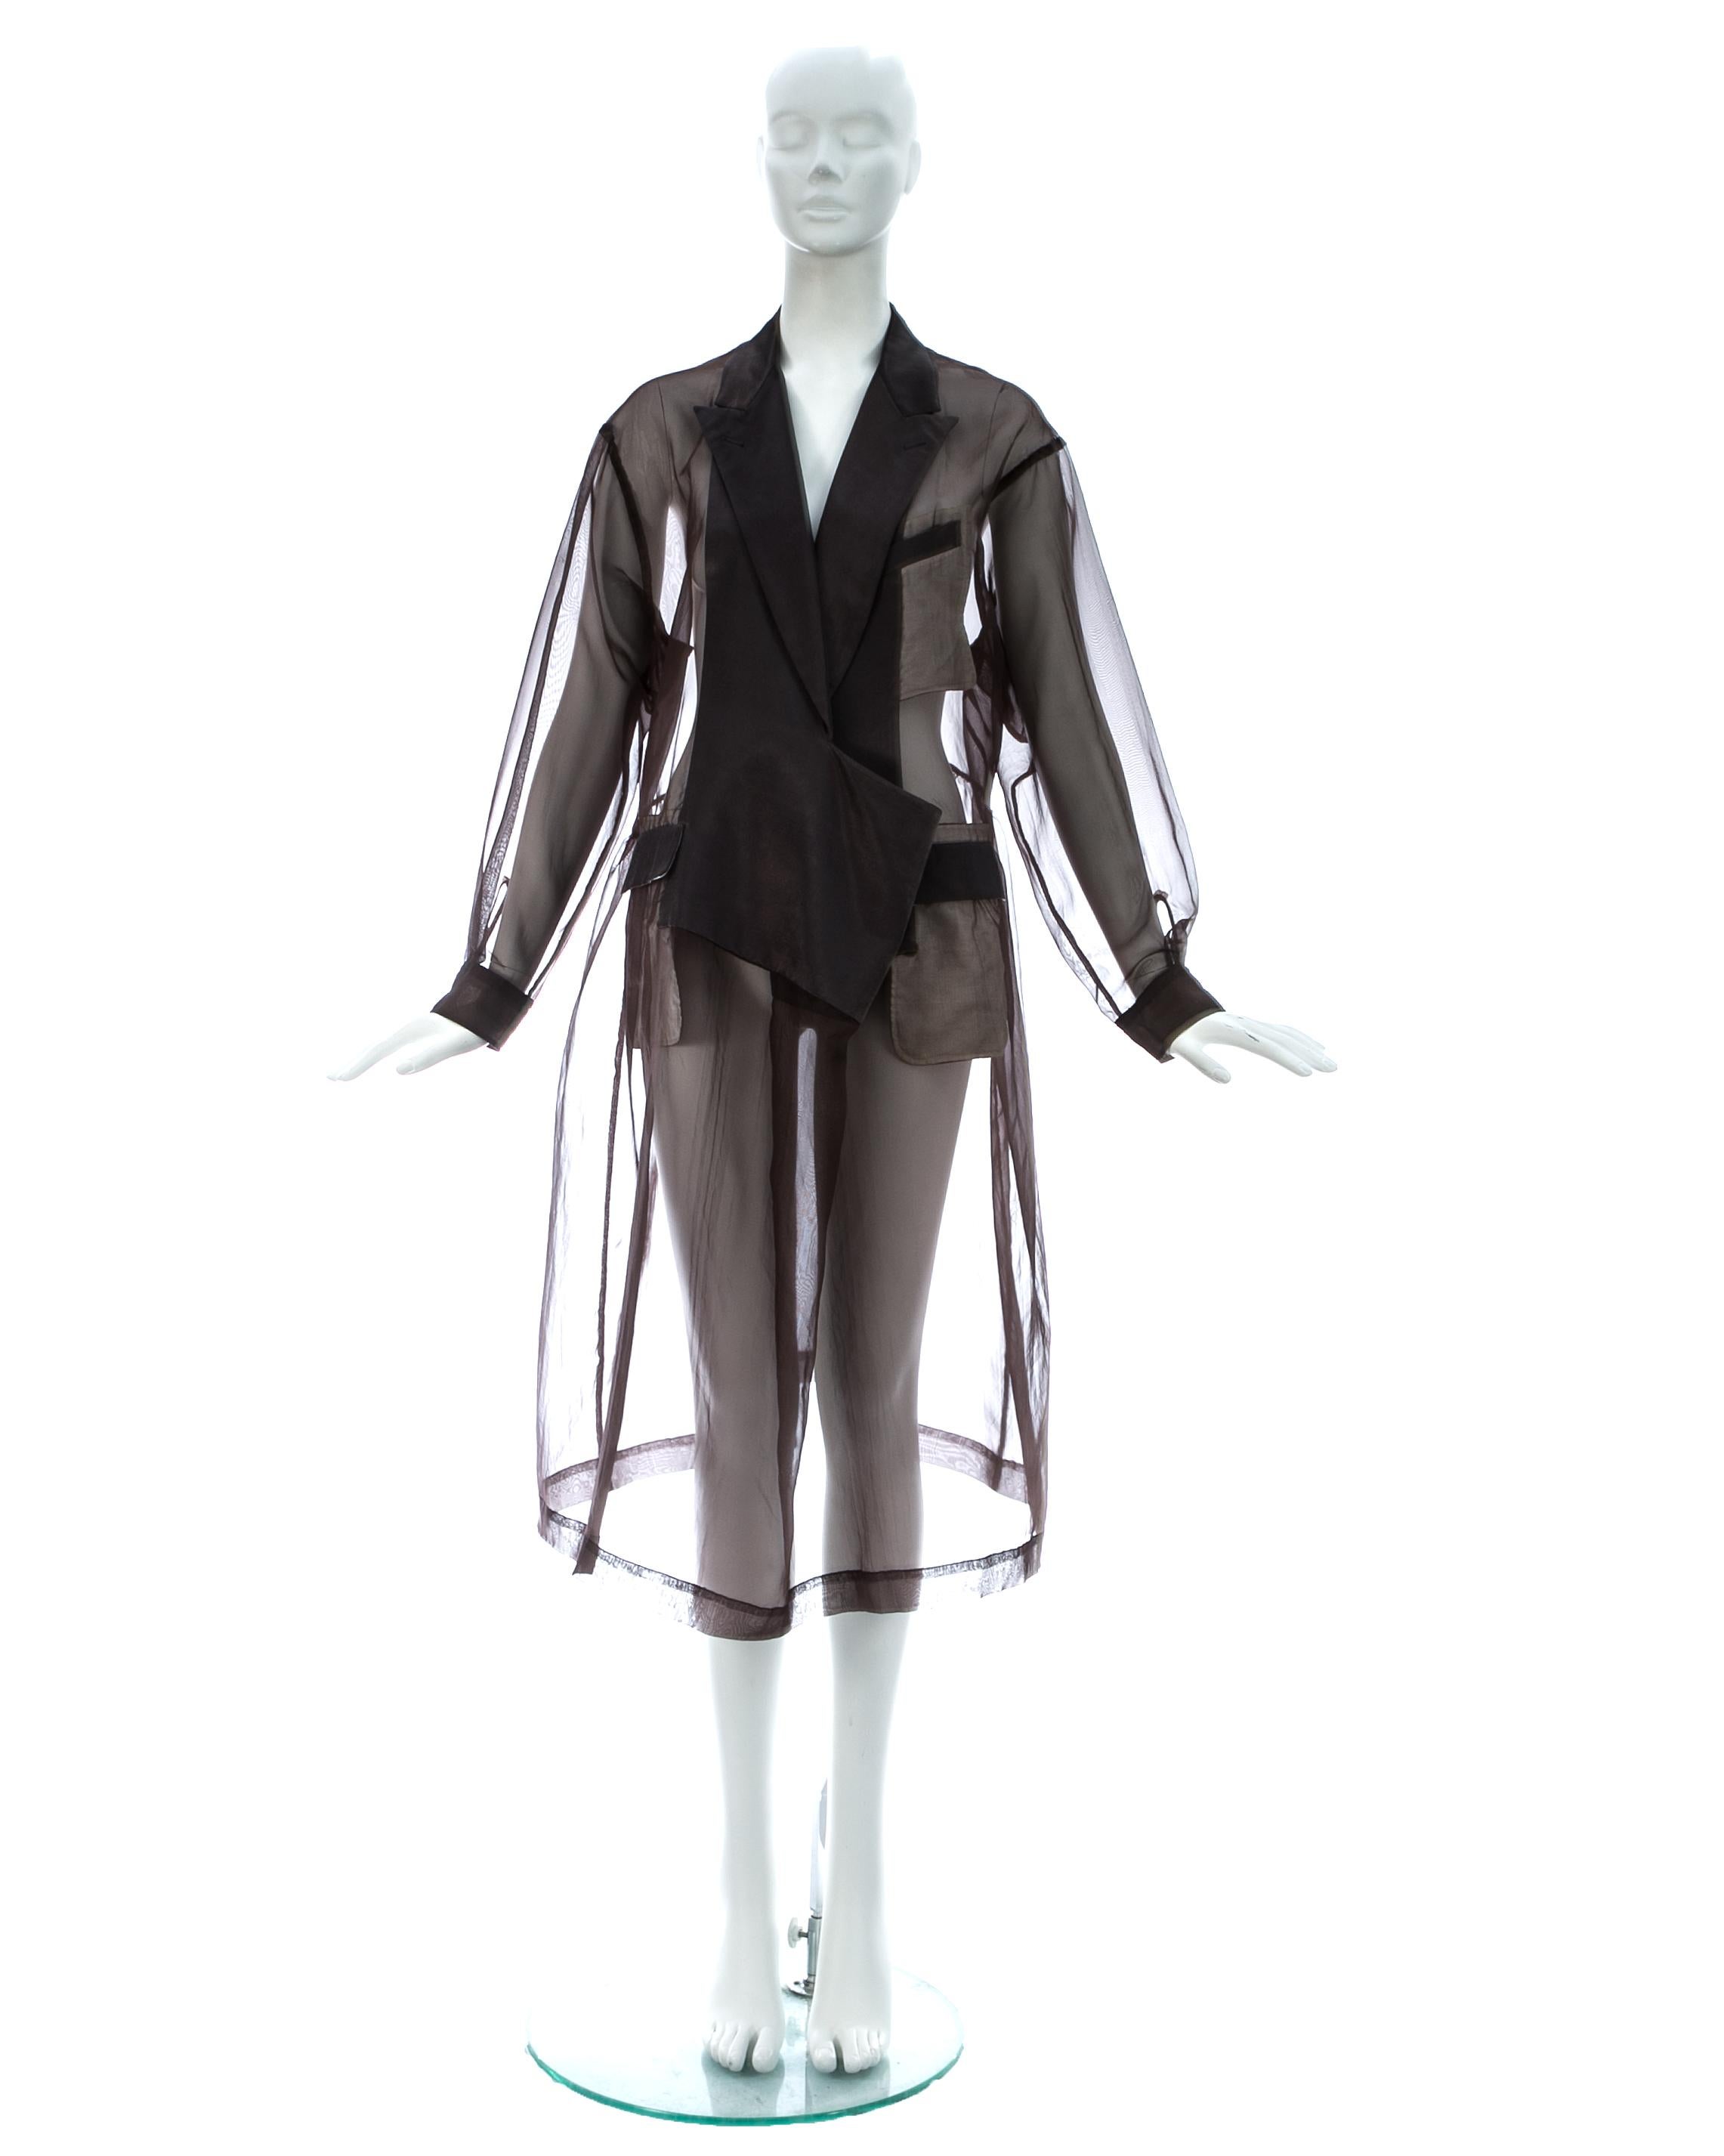 Comme des Garcons; deep mauve organza oversized smock dress with black satin lapels, pockets and cuffs. For the runway presentation these dresses were styled over and under suits.

Spring-Summer 1995